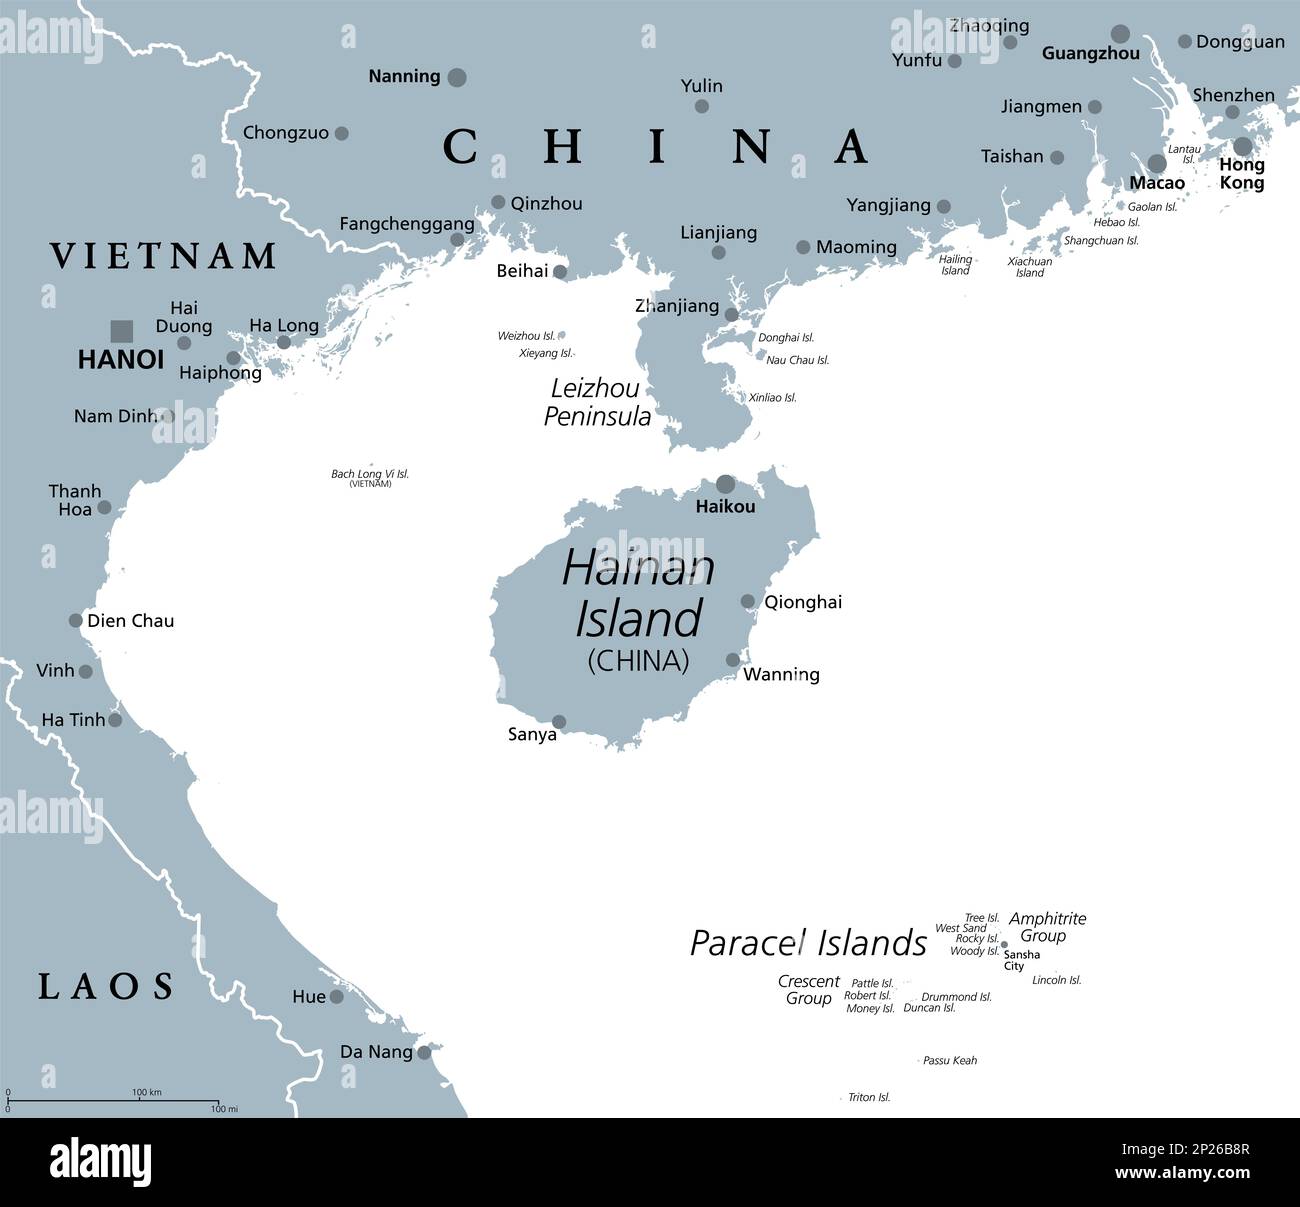 Hainan, southernmost province of China, and surrounding area, gray political map. Hainan Island, and Paracel Islands in the South China Sea. Stock Photo